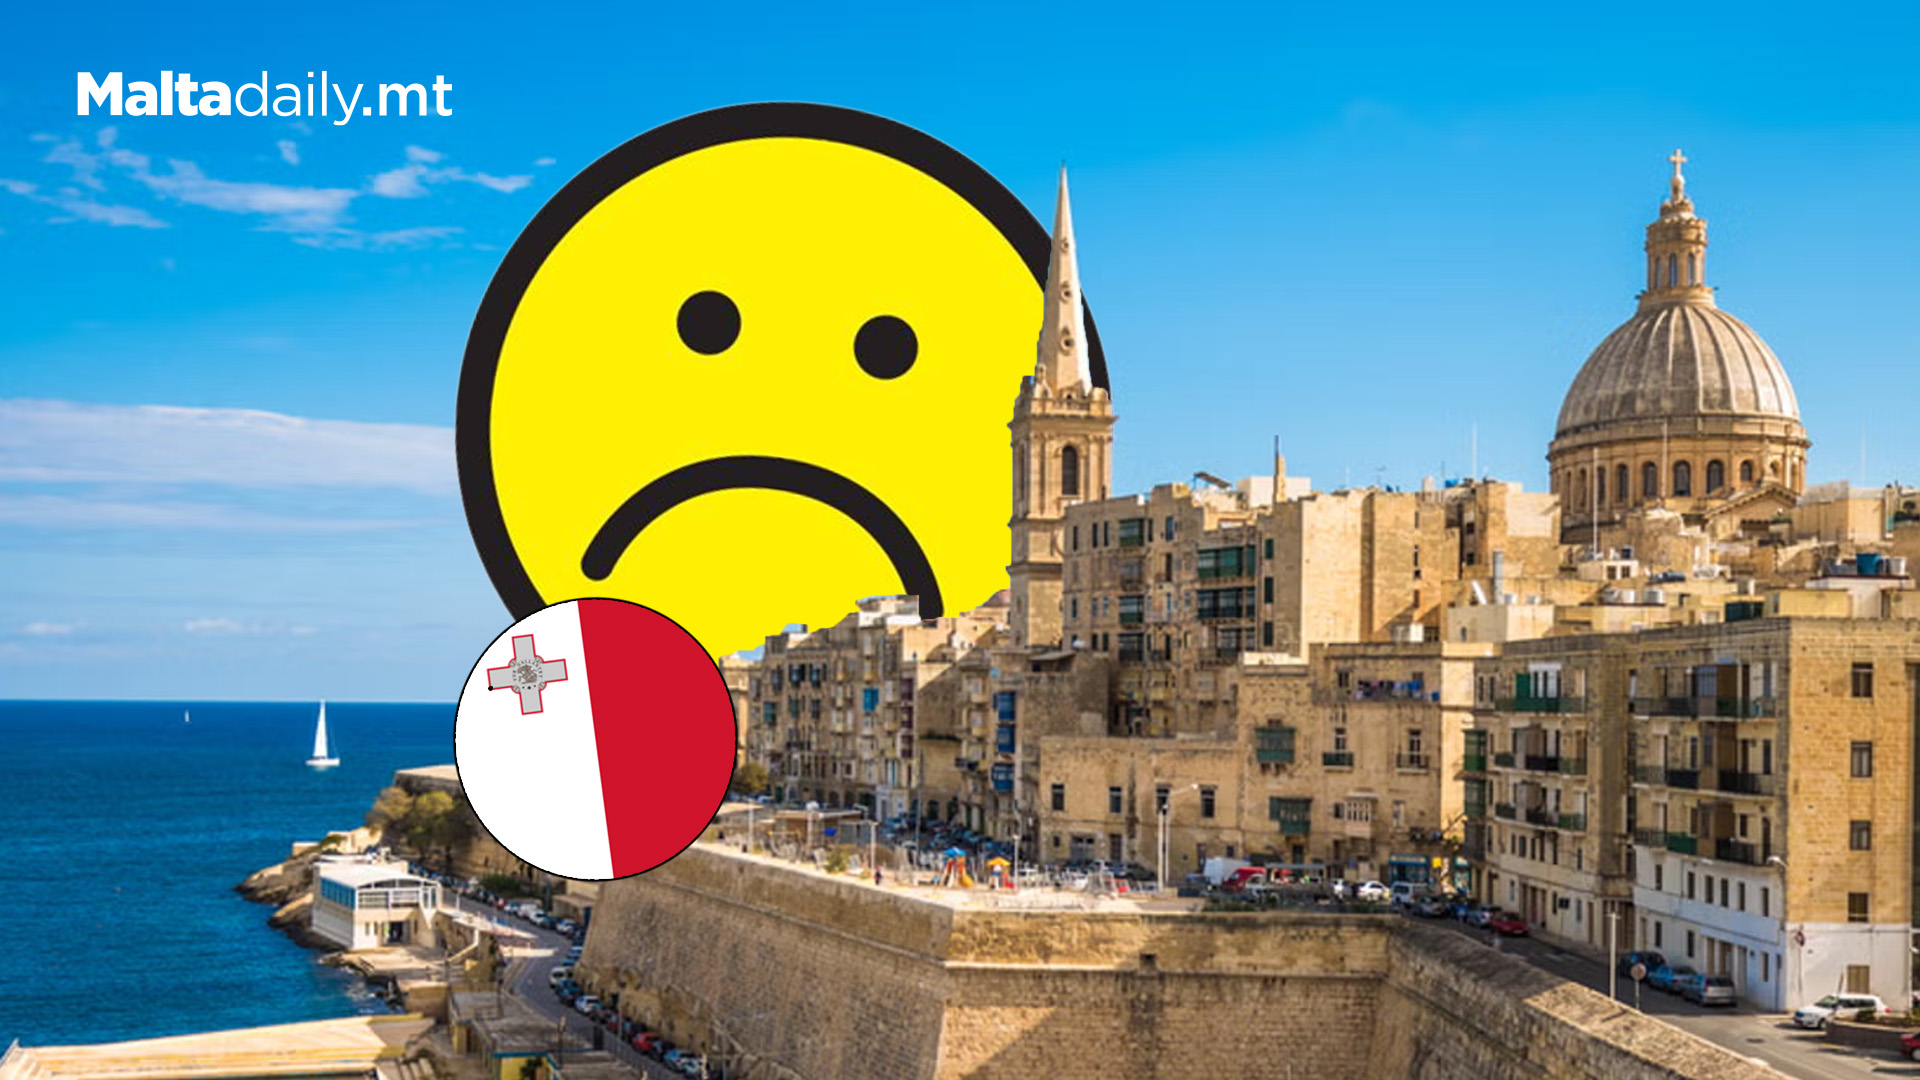 Malta's Youths Unhappiest In The EU